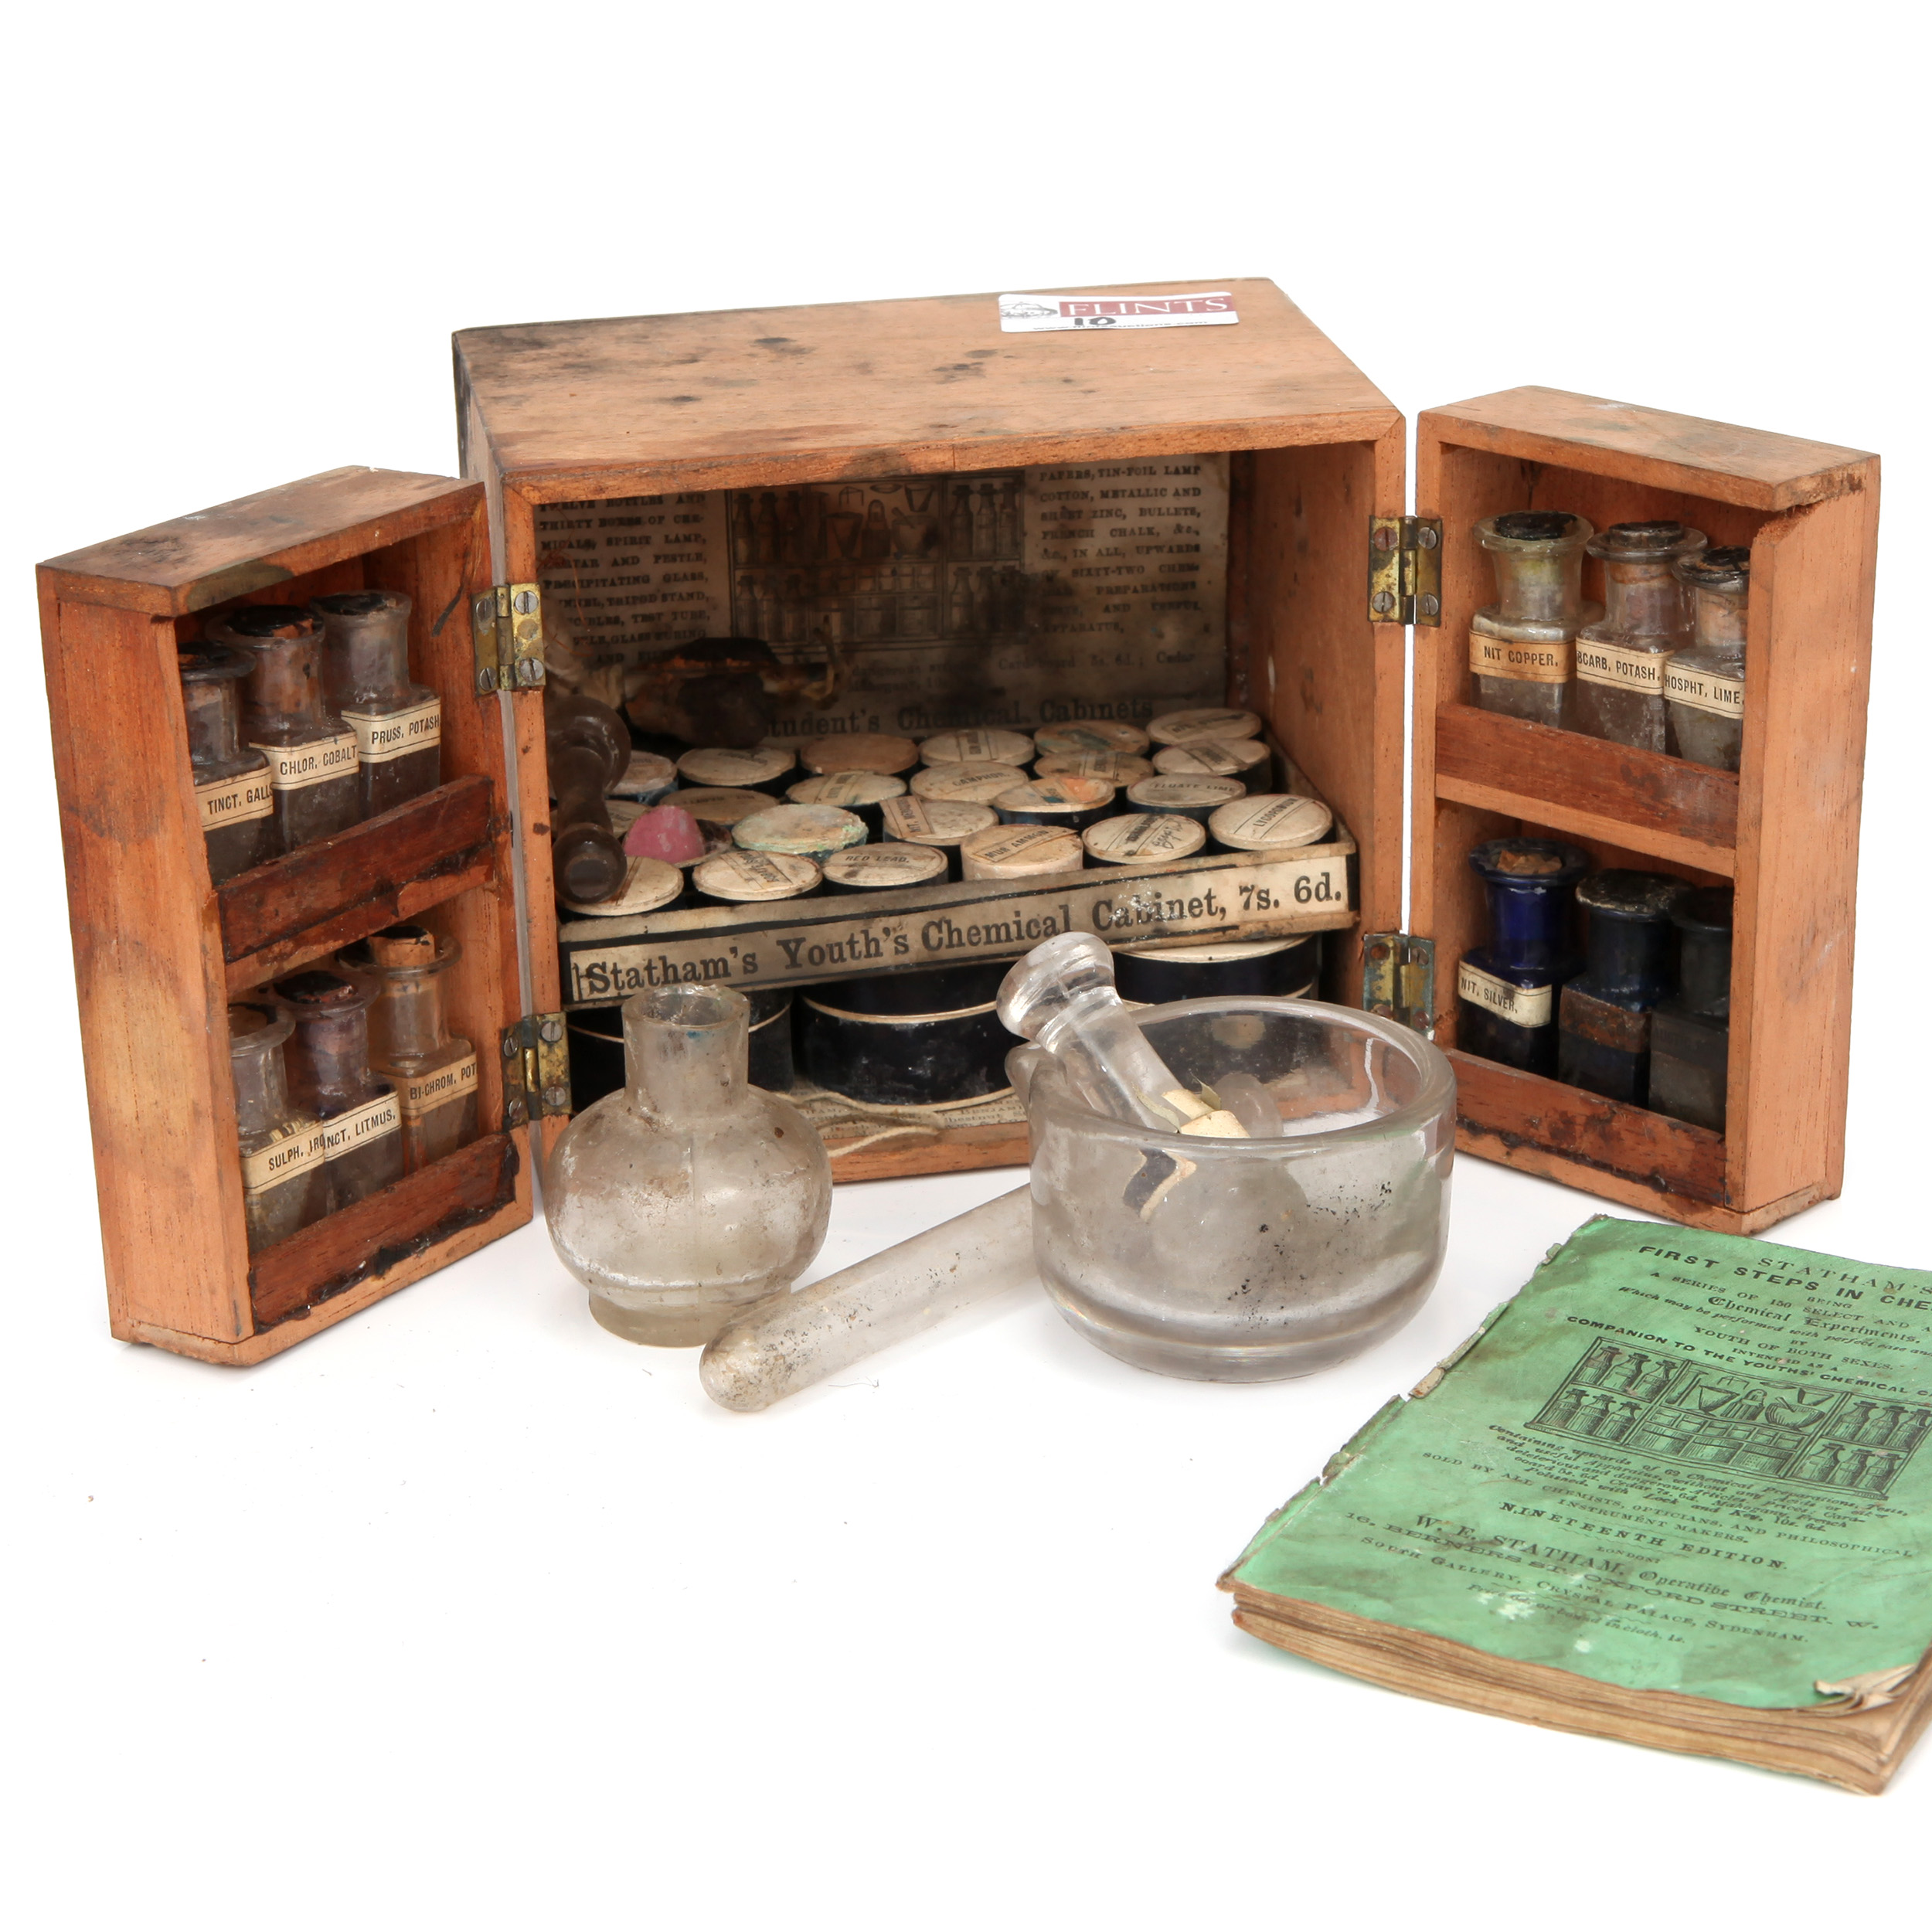 Statham' Youth's Chemical Cabinet - Chemistry Set,